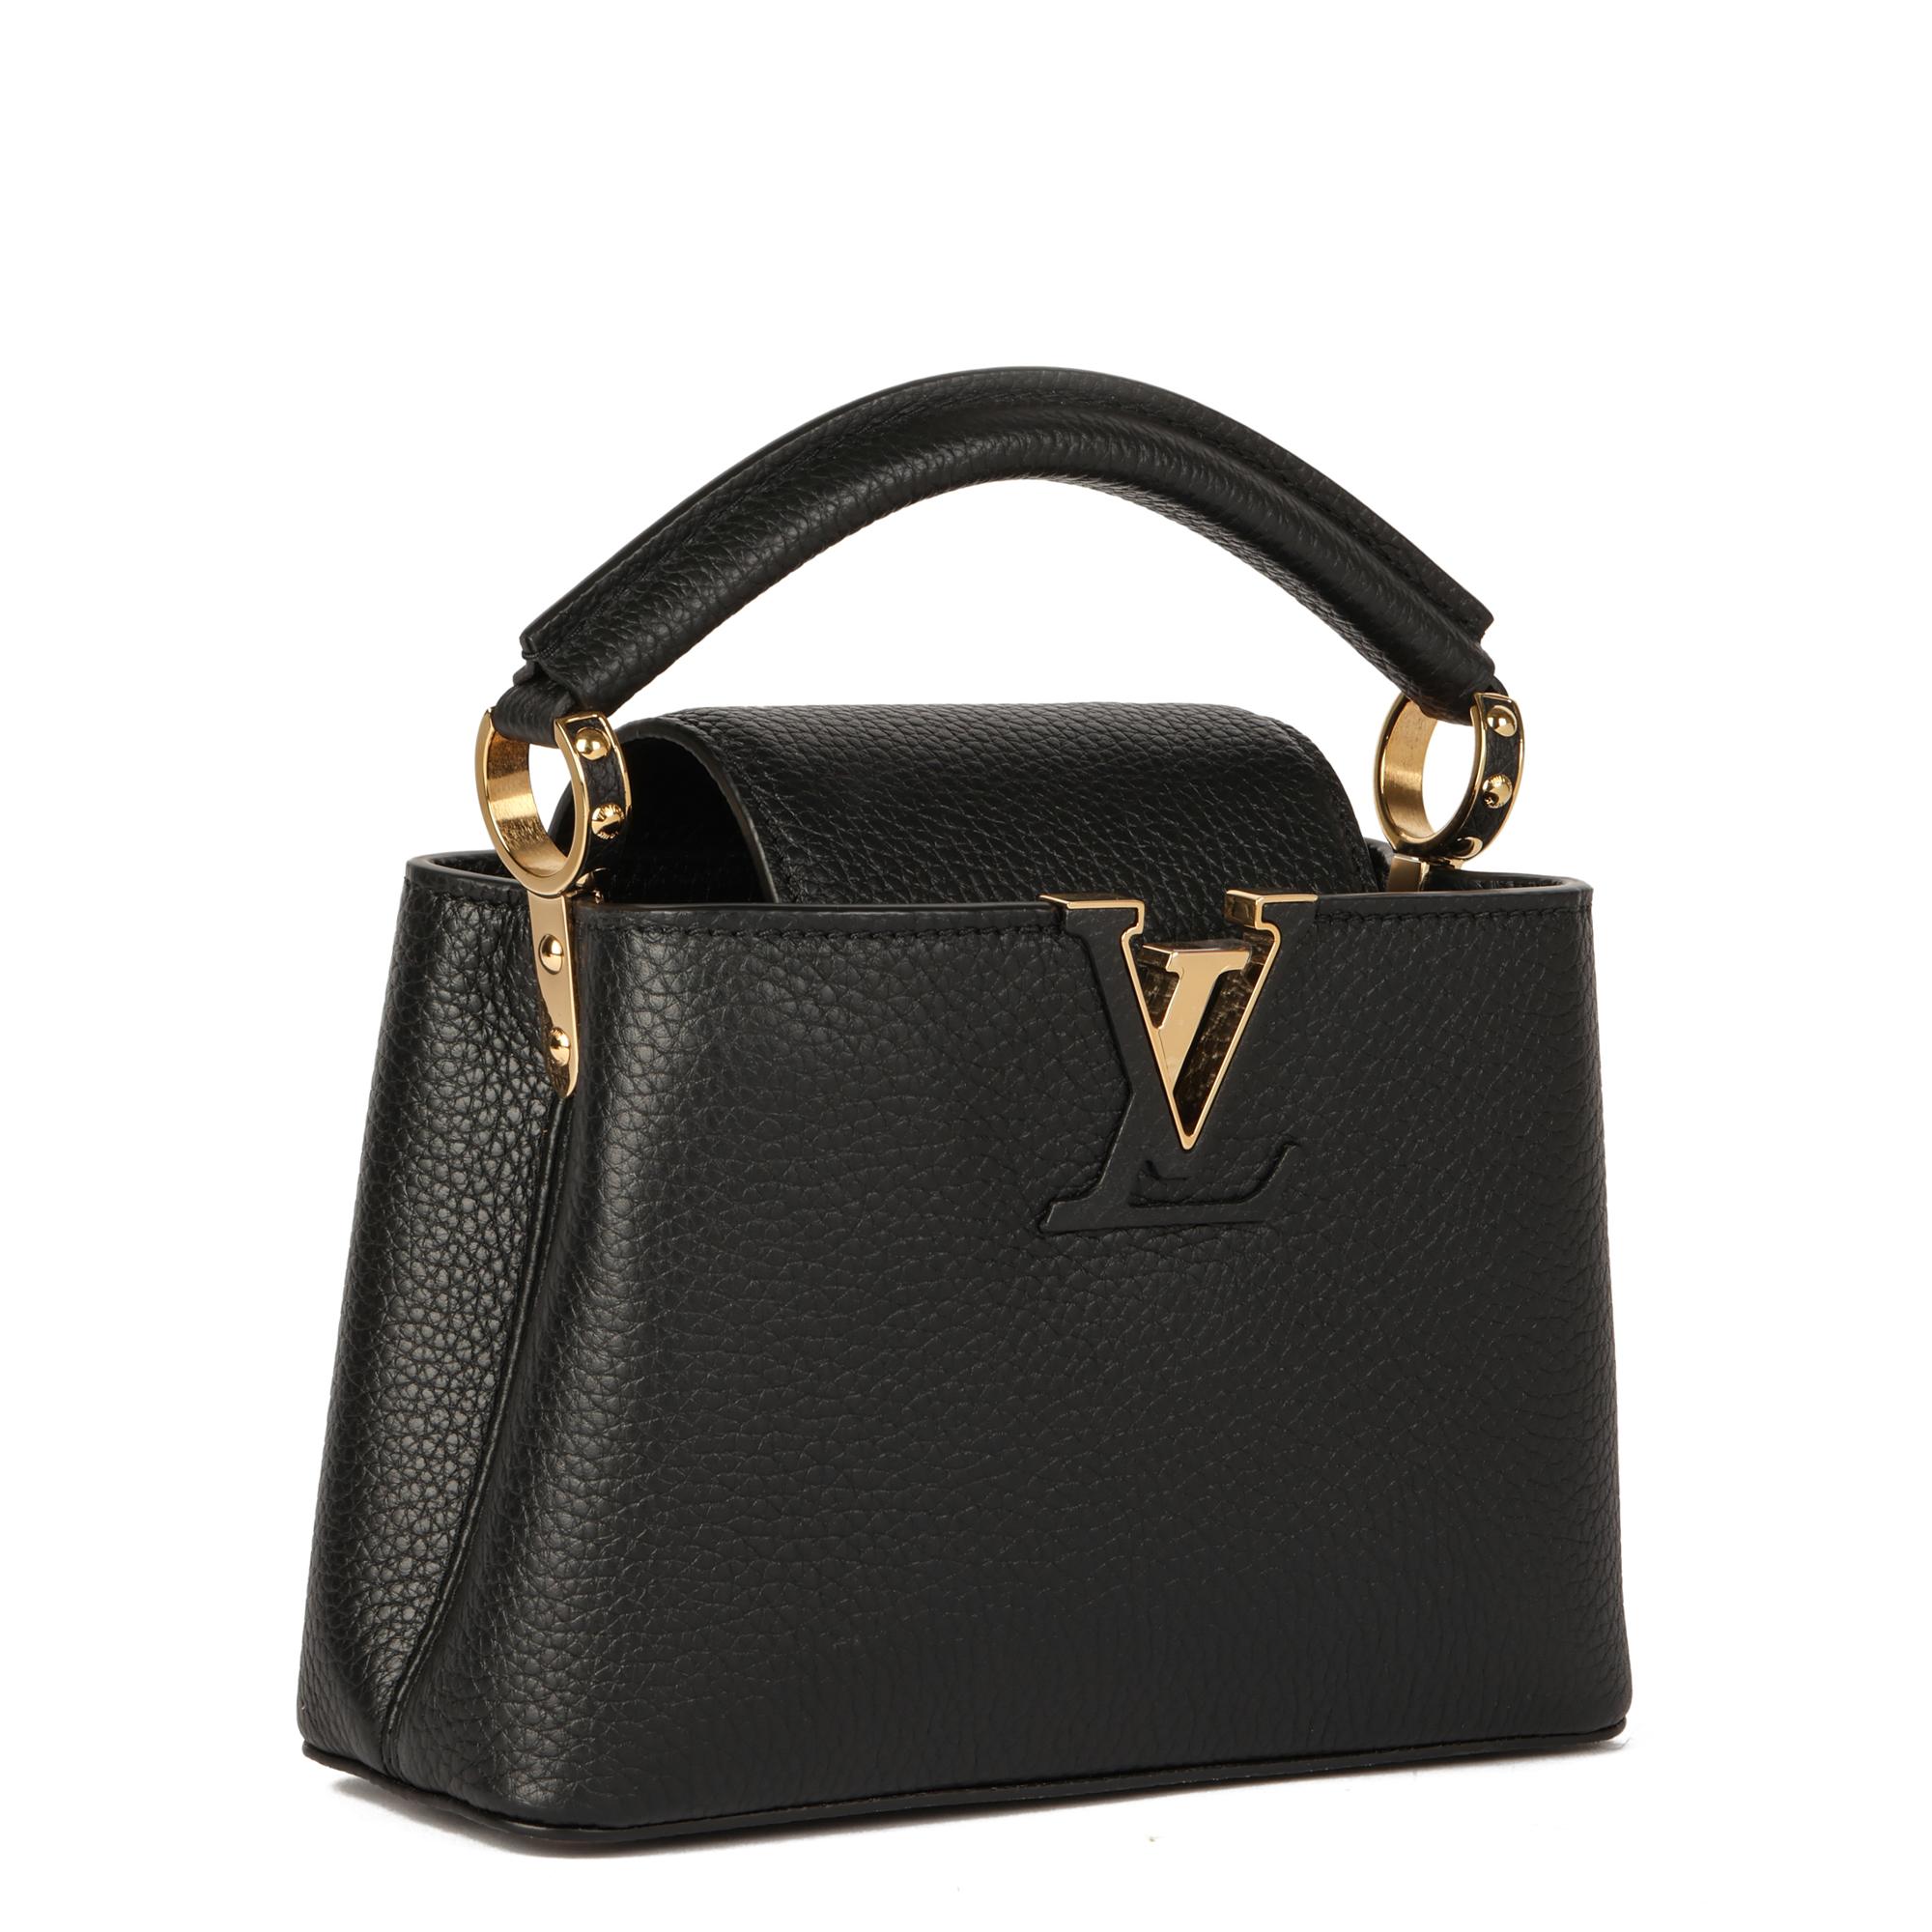 Louis Vuitton Black Taurillon Leather Mini Capucines

CONDITION NOTES
The exterior is in exceptional condition with minimal signs of use.
The interior is in exceptional condition with minimal signs of use.
The hardware is in exceptional condition